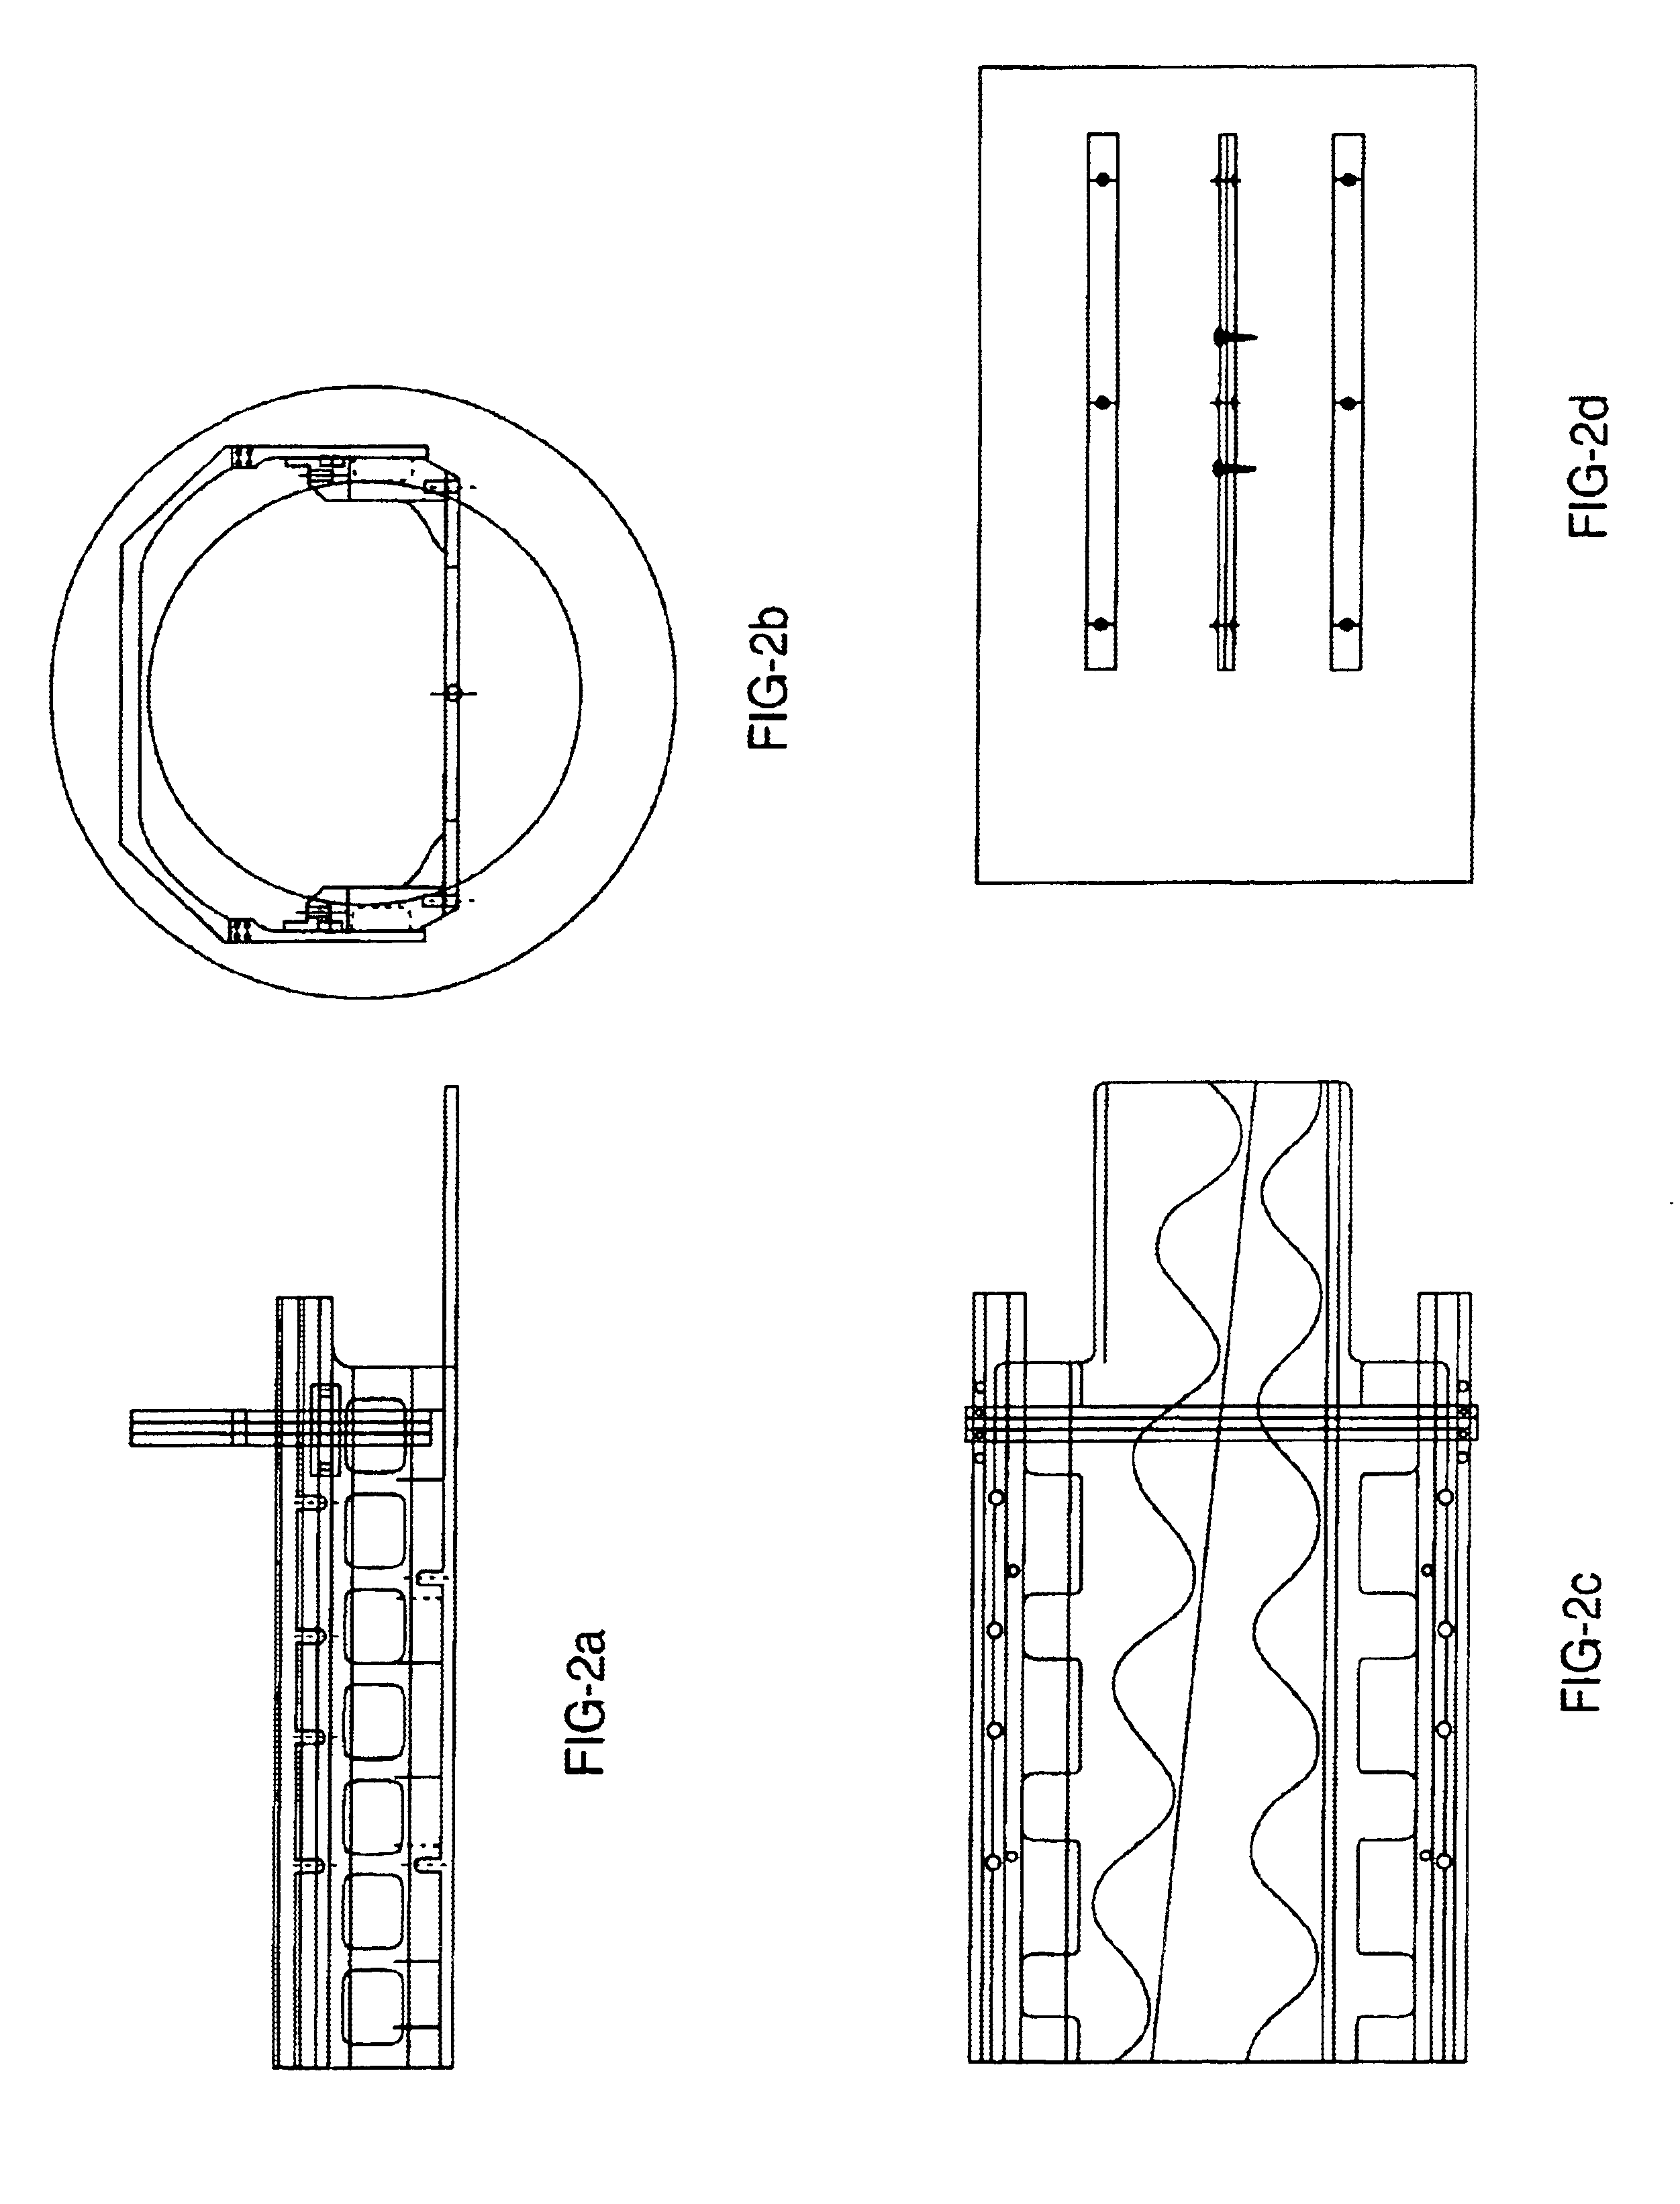 Whole body stereotactic localization and immobilization system